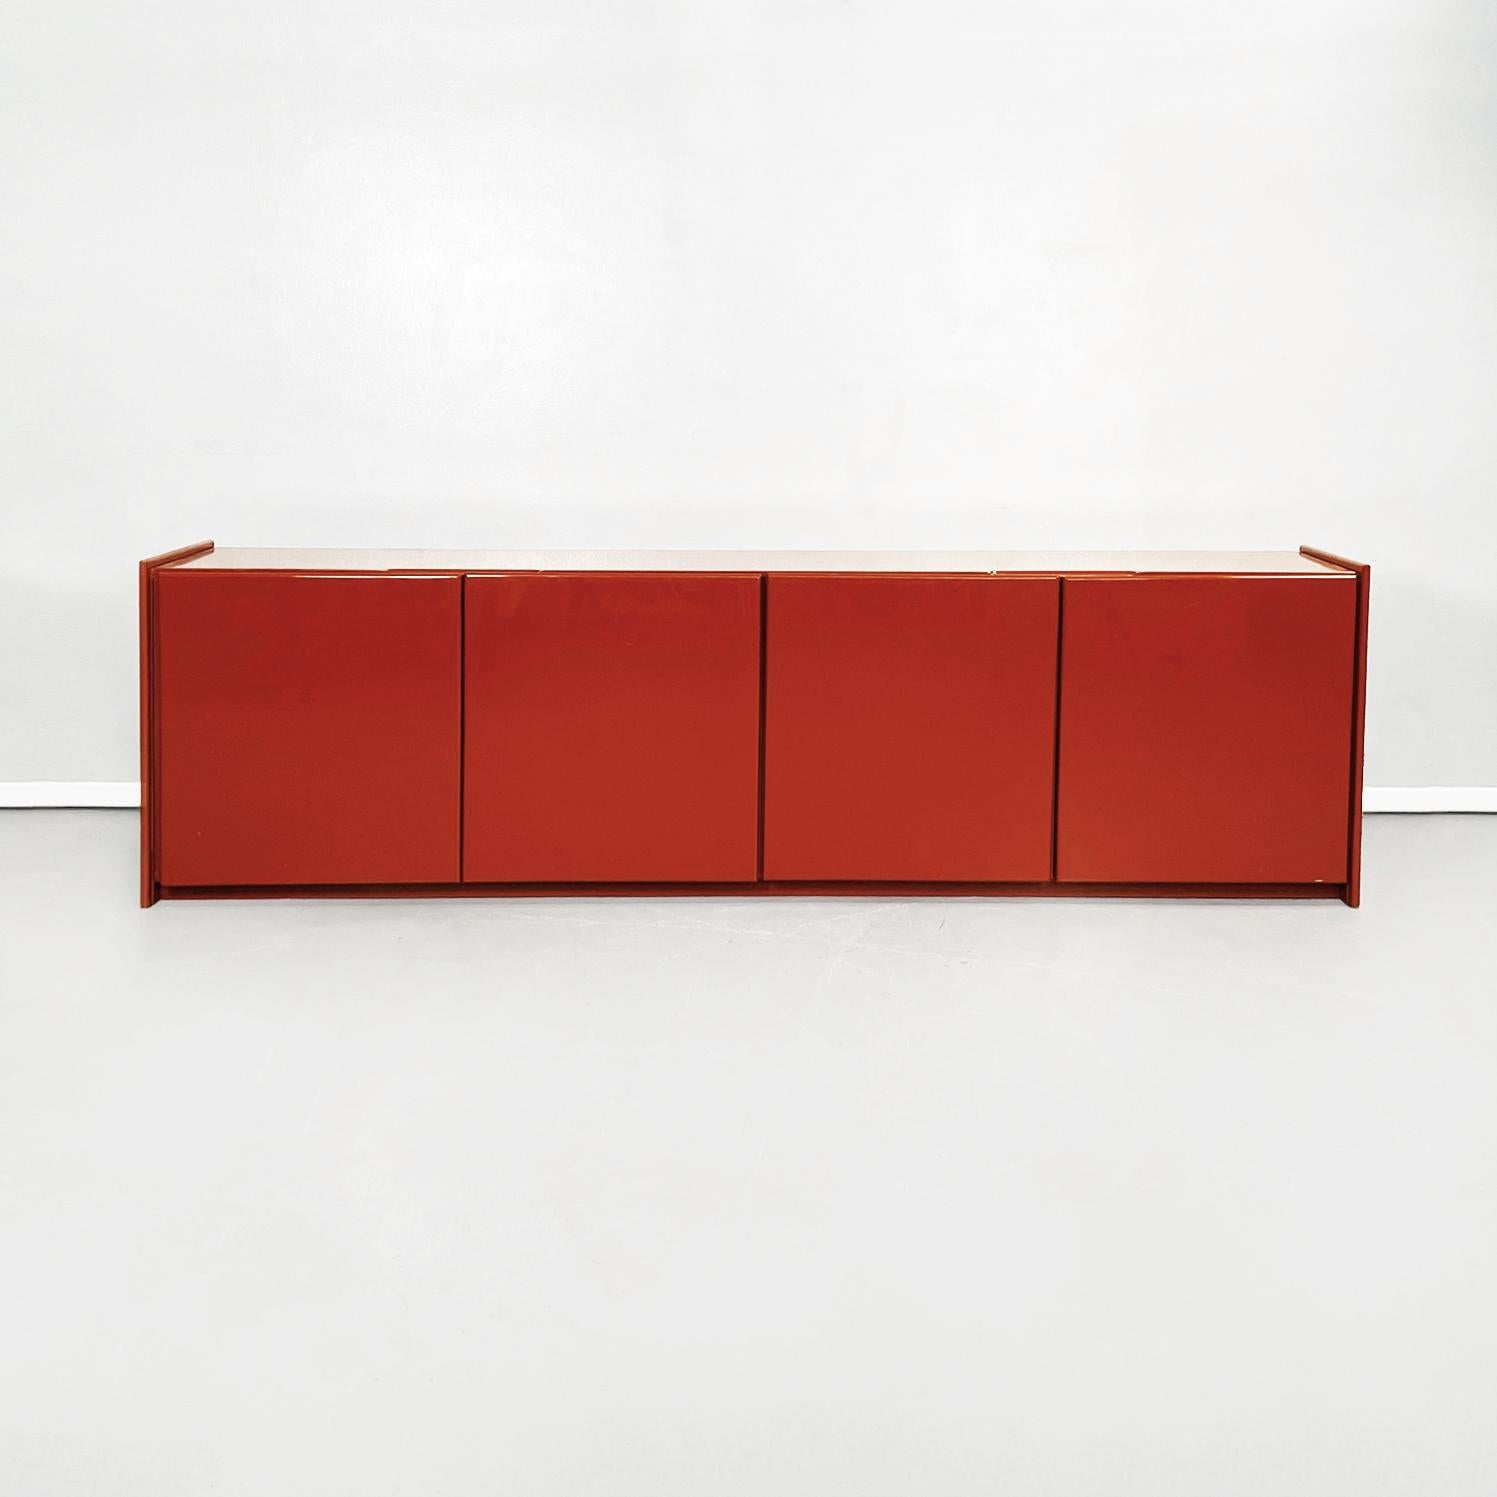 Italian Mid-Century Modern rectangular red lacquered solid wood sideboard, 1980s
Rectangular red lacquered solid wood sideboard with rounded corners. The sideboard has 4 doors with hinged opening and inside each there is a wooden